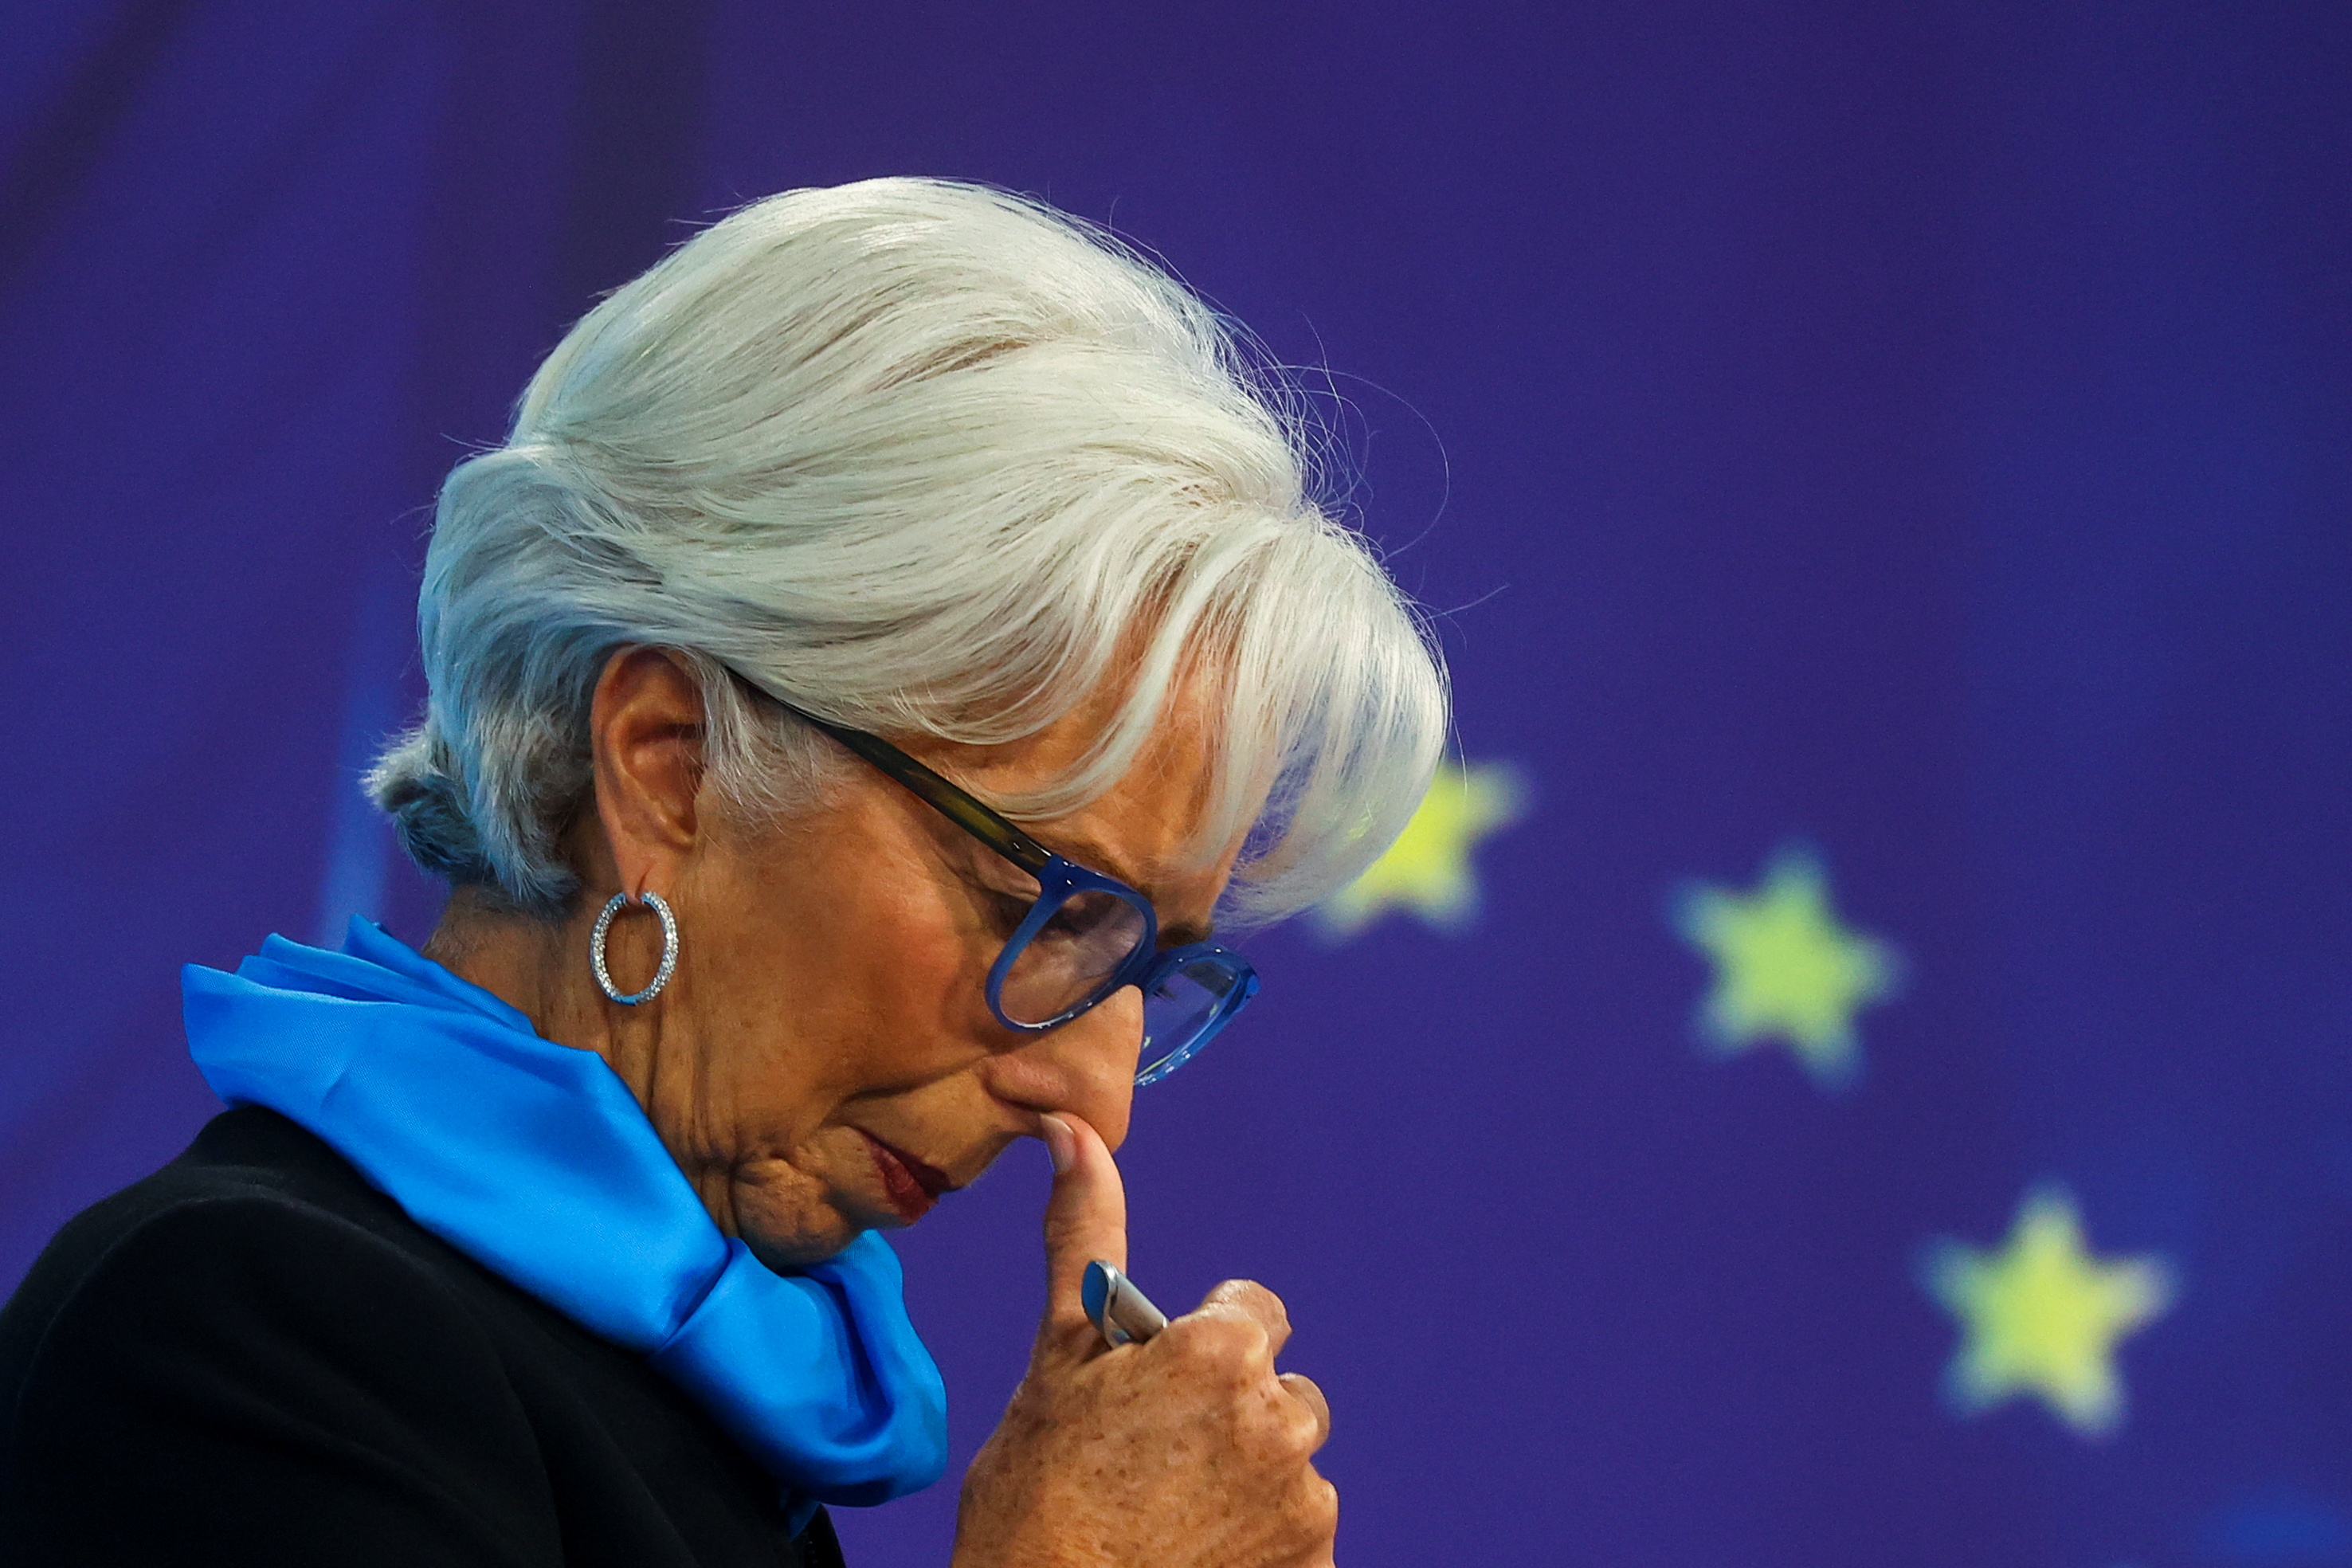 ECB President Lagarde takes part in a news conference, in Frankfurt